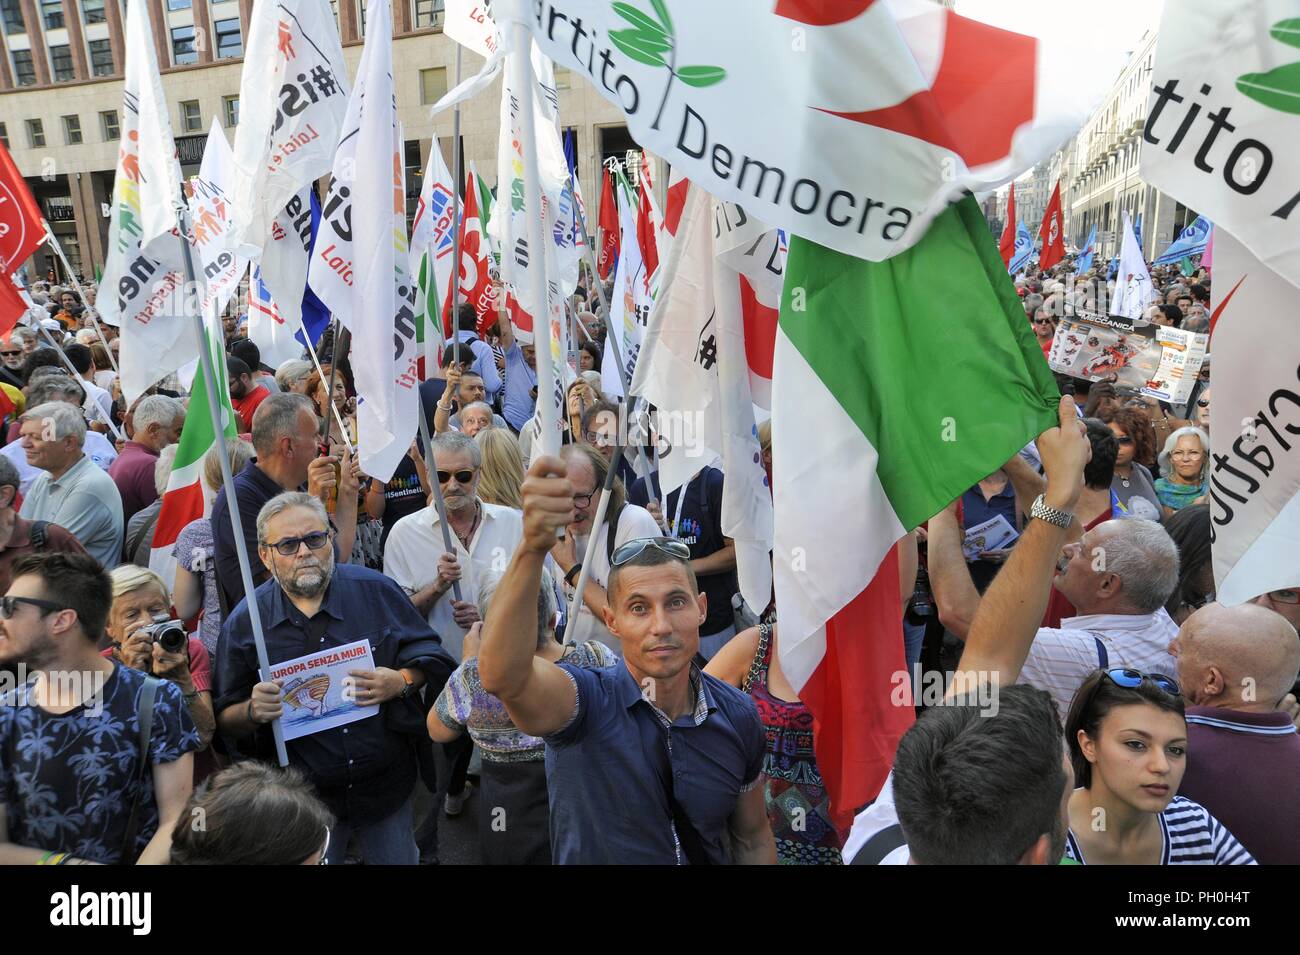 Milan (Italy), 28 August 2018, anti-fascist and anti-racist demonstration called by numerous left-wing and democratic parties and organizations to mark the meeting in the prefecture of Matteo Salvini, minister of the interior and leader of the right-wing party Lega, with the Hungarian premier Viktor Orban. Stock Photo